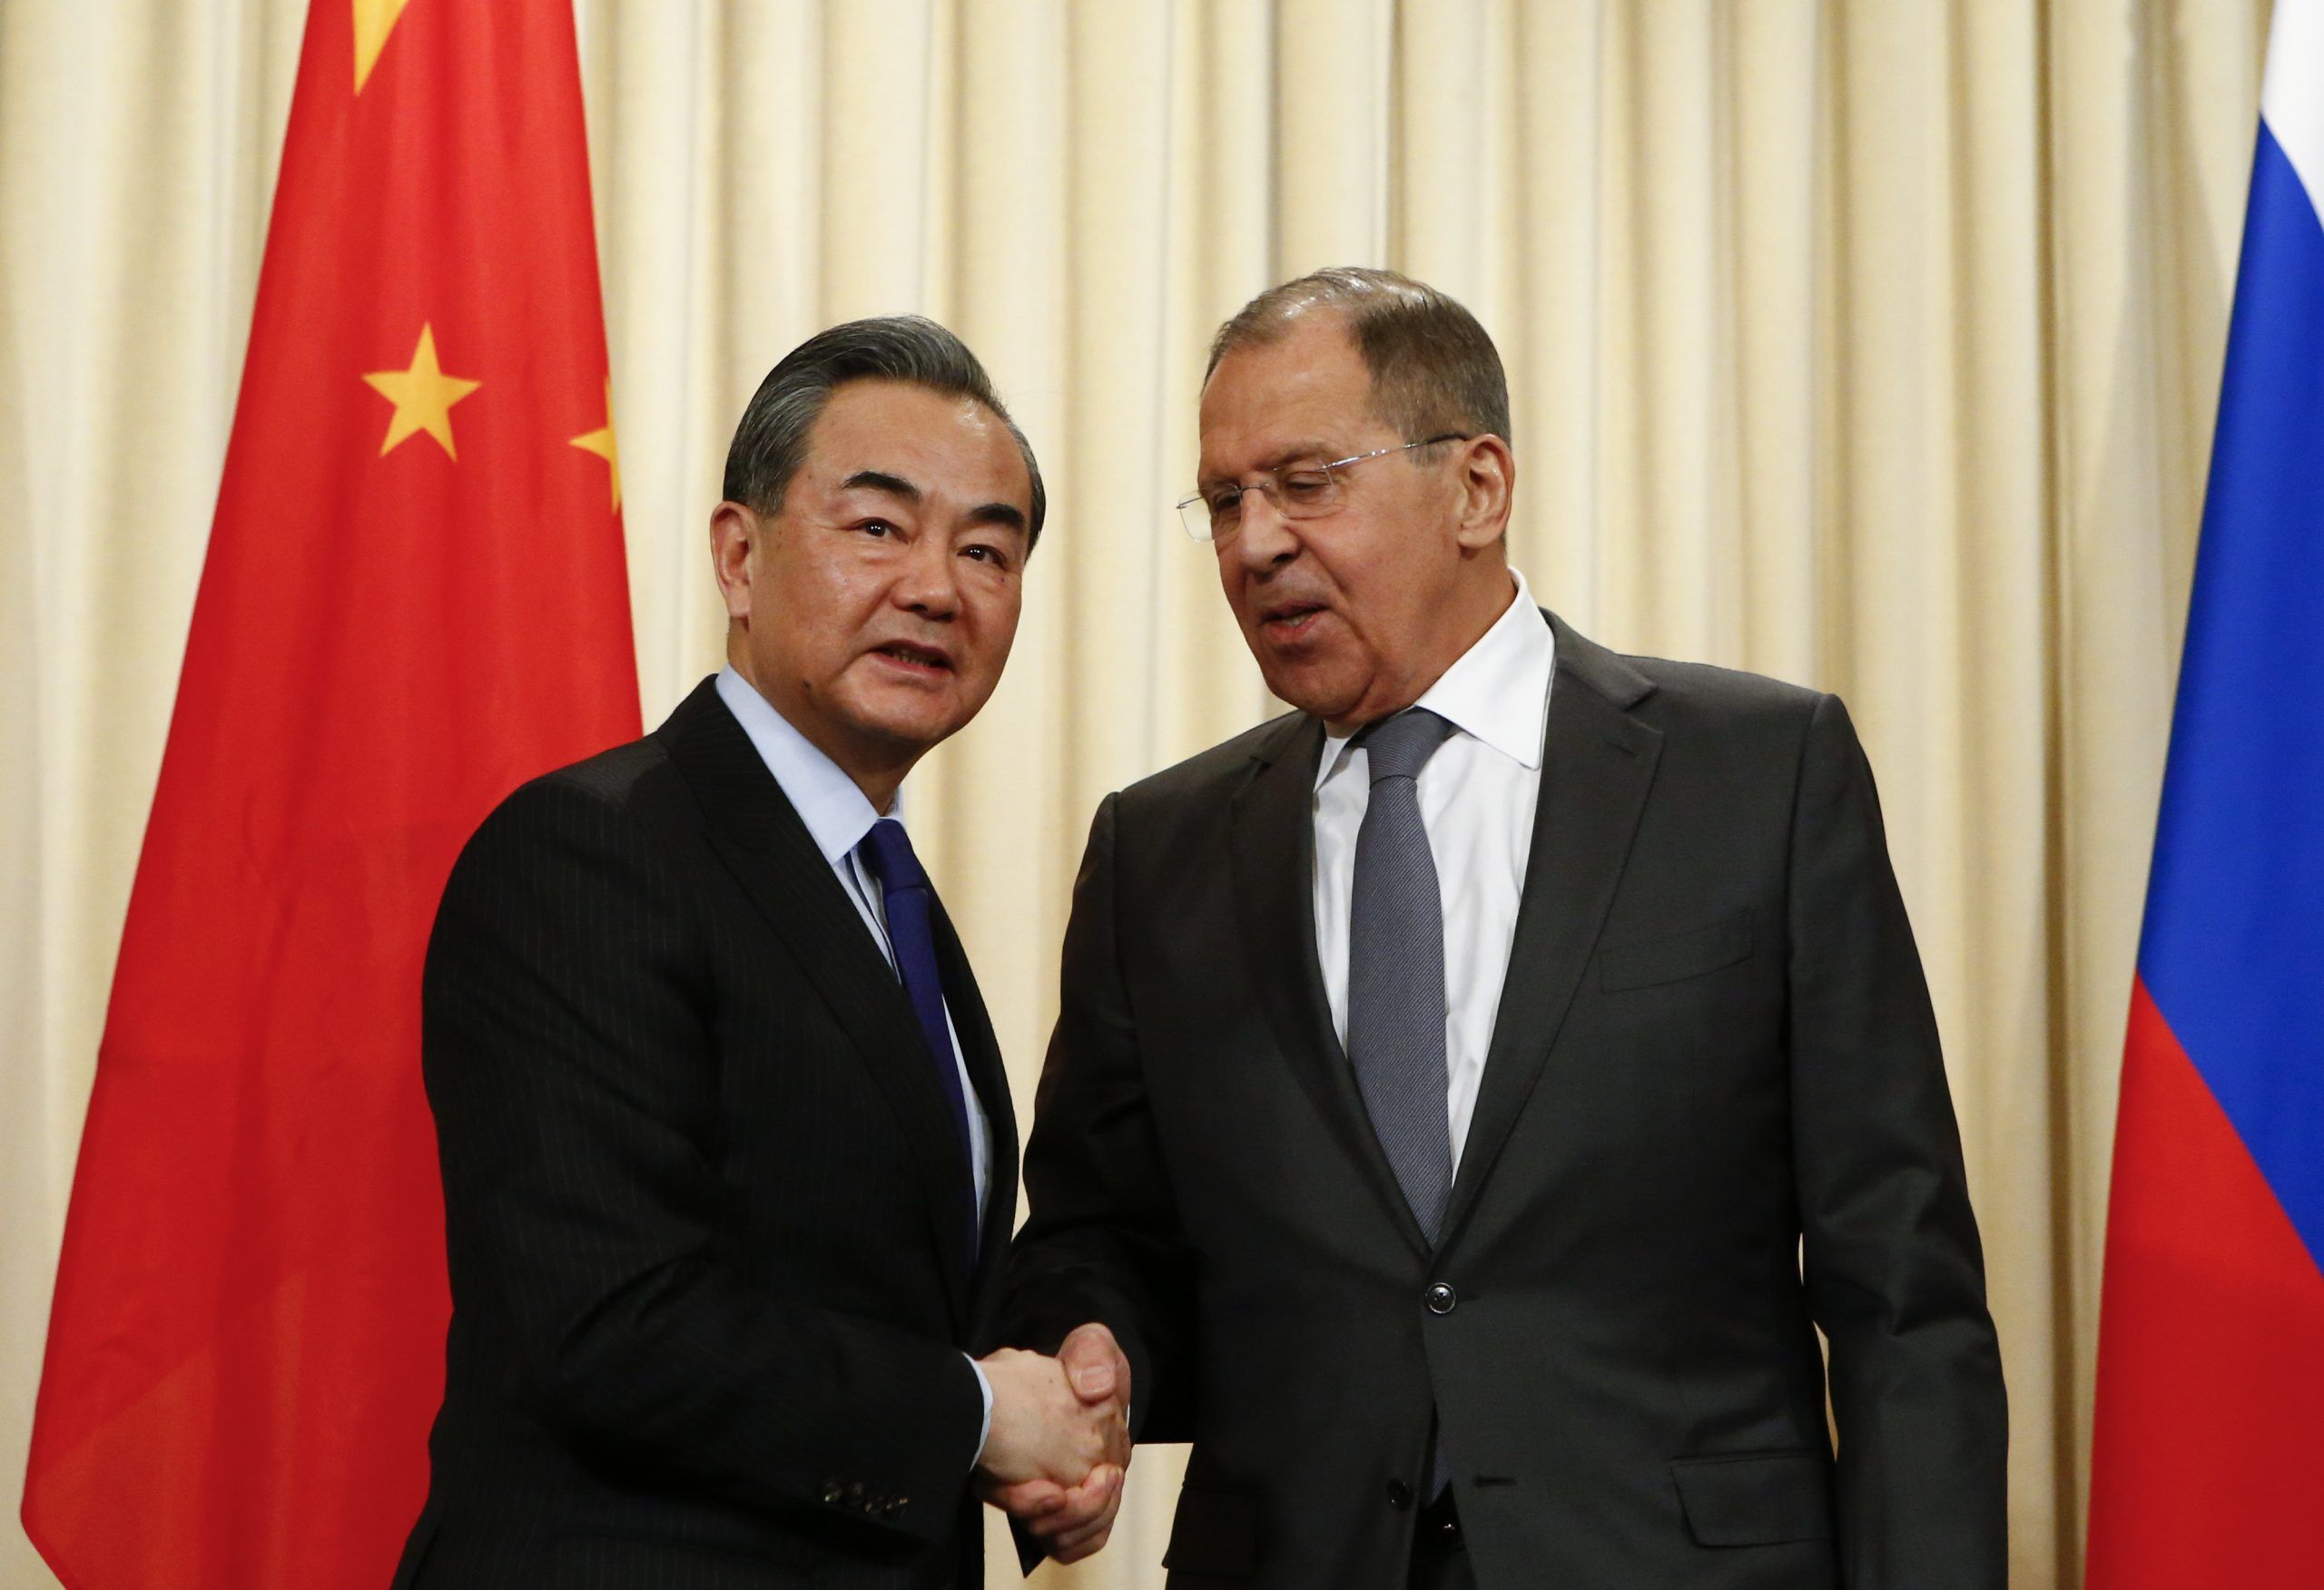 FILE PHOTO: Russia's Foreign Minister Sergei Lavrov (R) shakes hands with China’s top diplomat State Councillor Wang Yi during a news conference in Moscow. REUTERS/Sergei Karpukhin